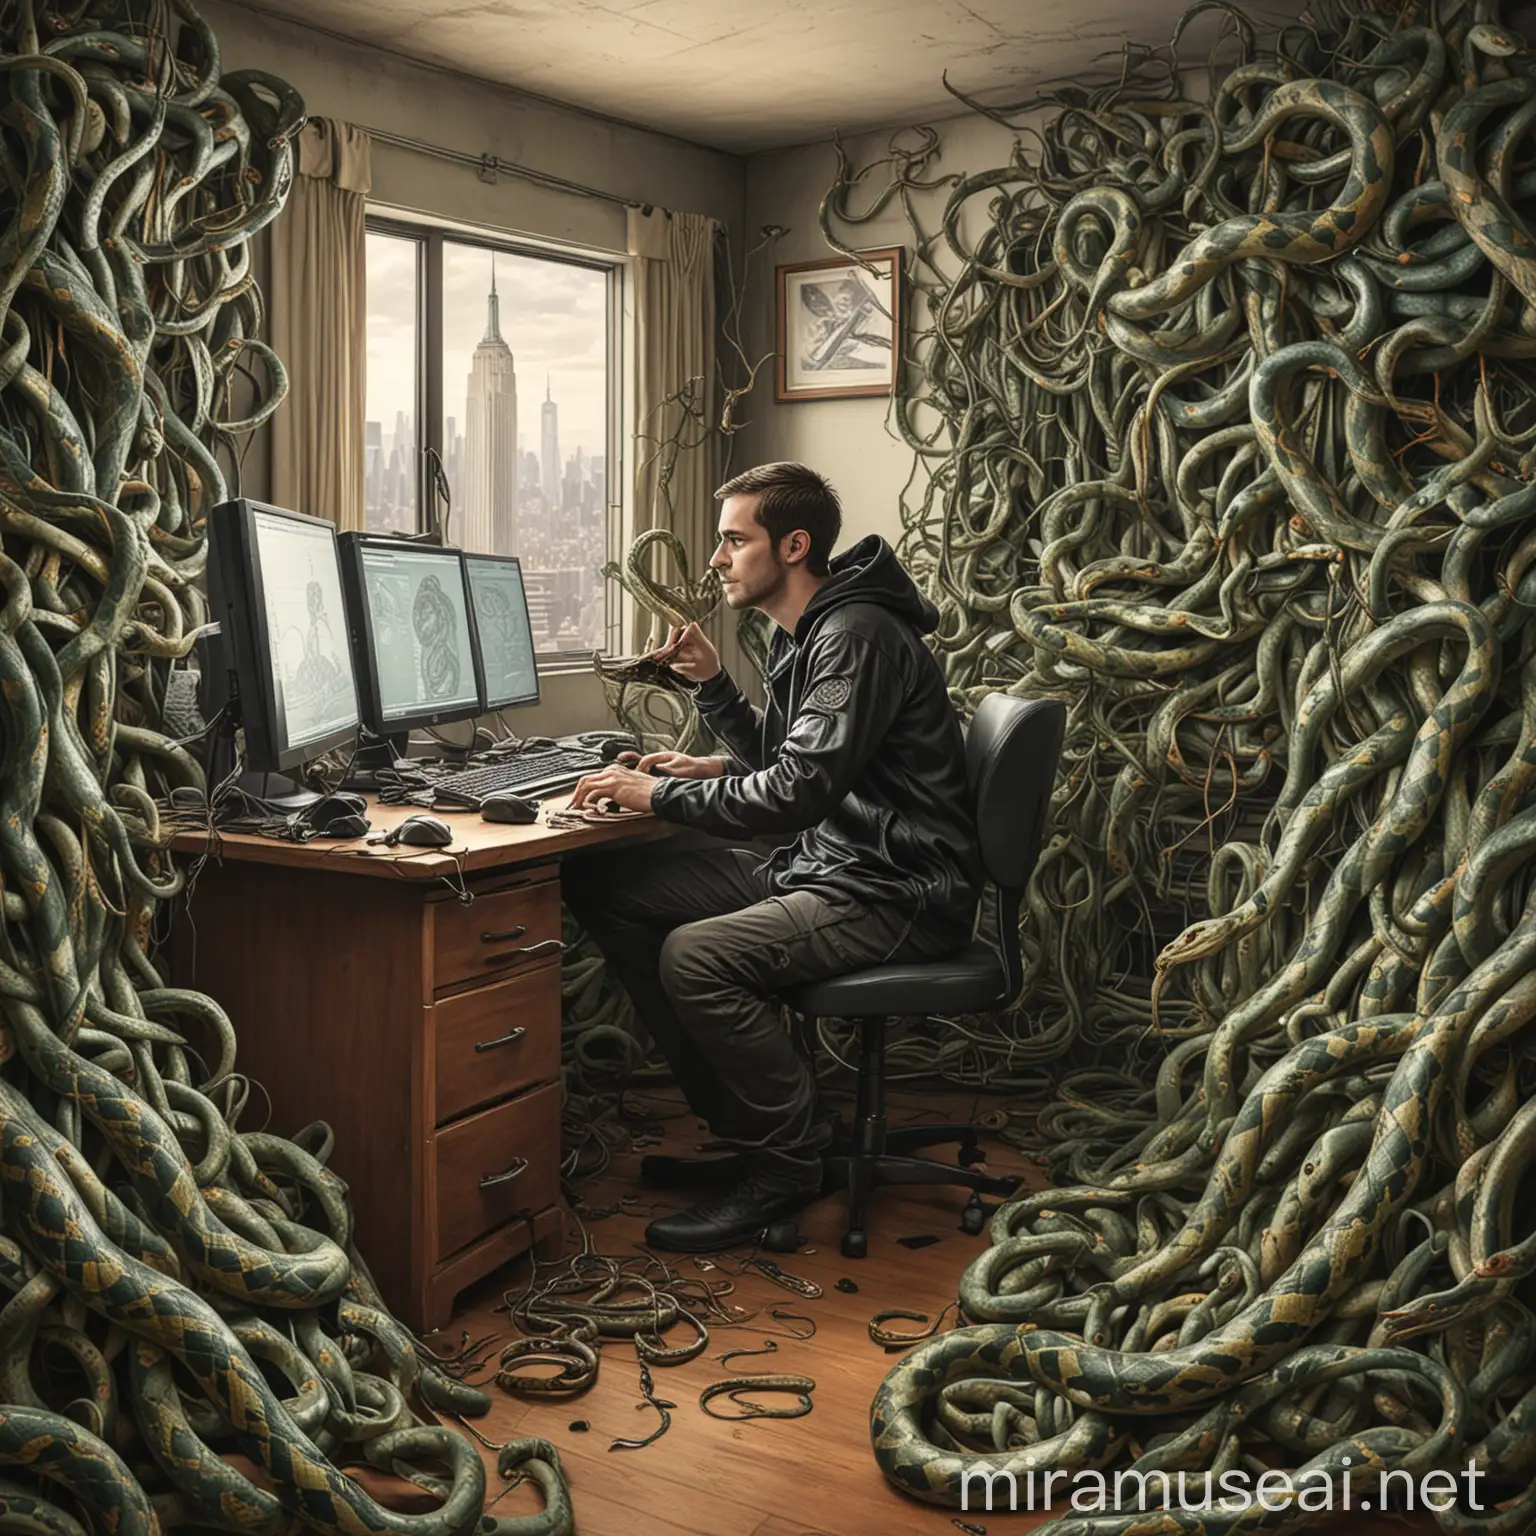 draw me a picture of a hacker sitting at a computer in a room full of snakes in a penthouse in NYC